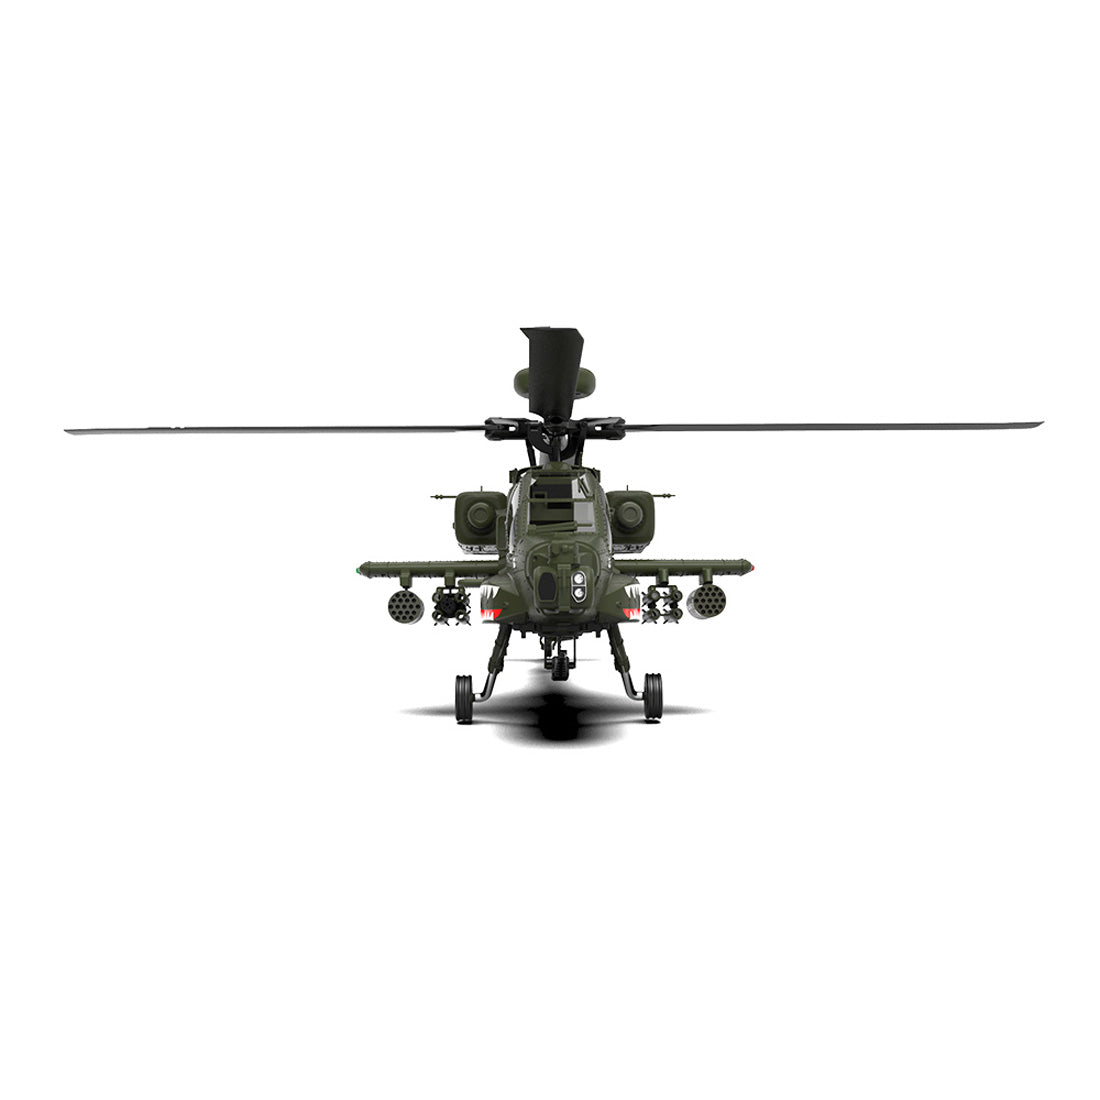 YU XIANG F11 AH60 Apache 1/32 Ratio 2.4G Remote-controlled Dual-axis Co-drive without Ailerons 6G/3D Stunt Military RC Helicopter Model--razordon